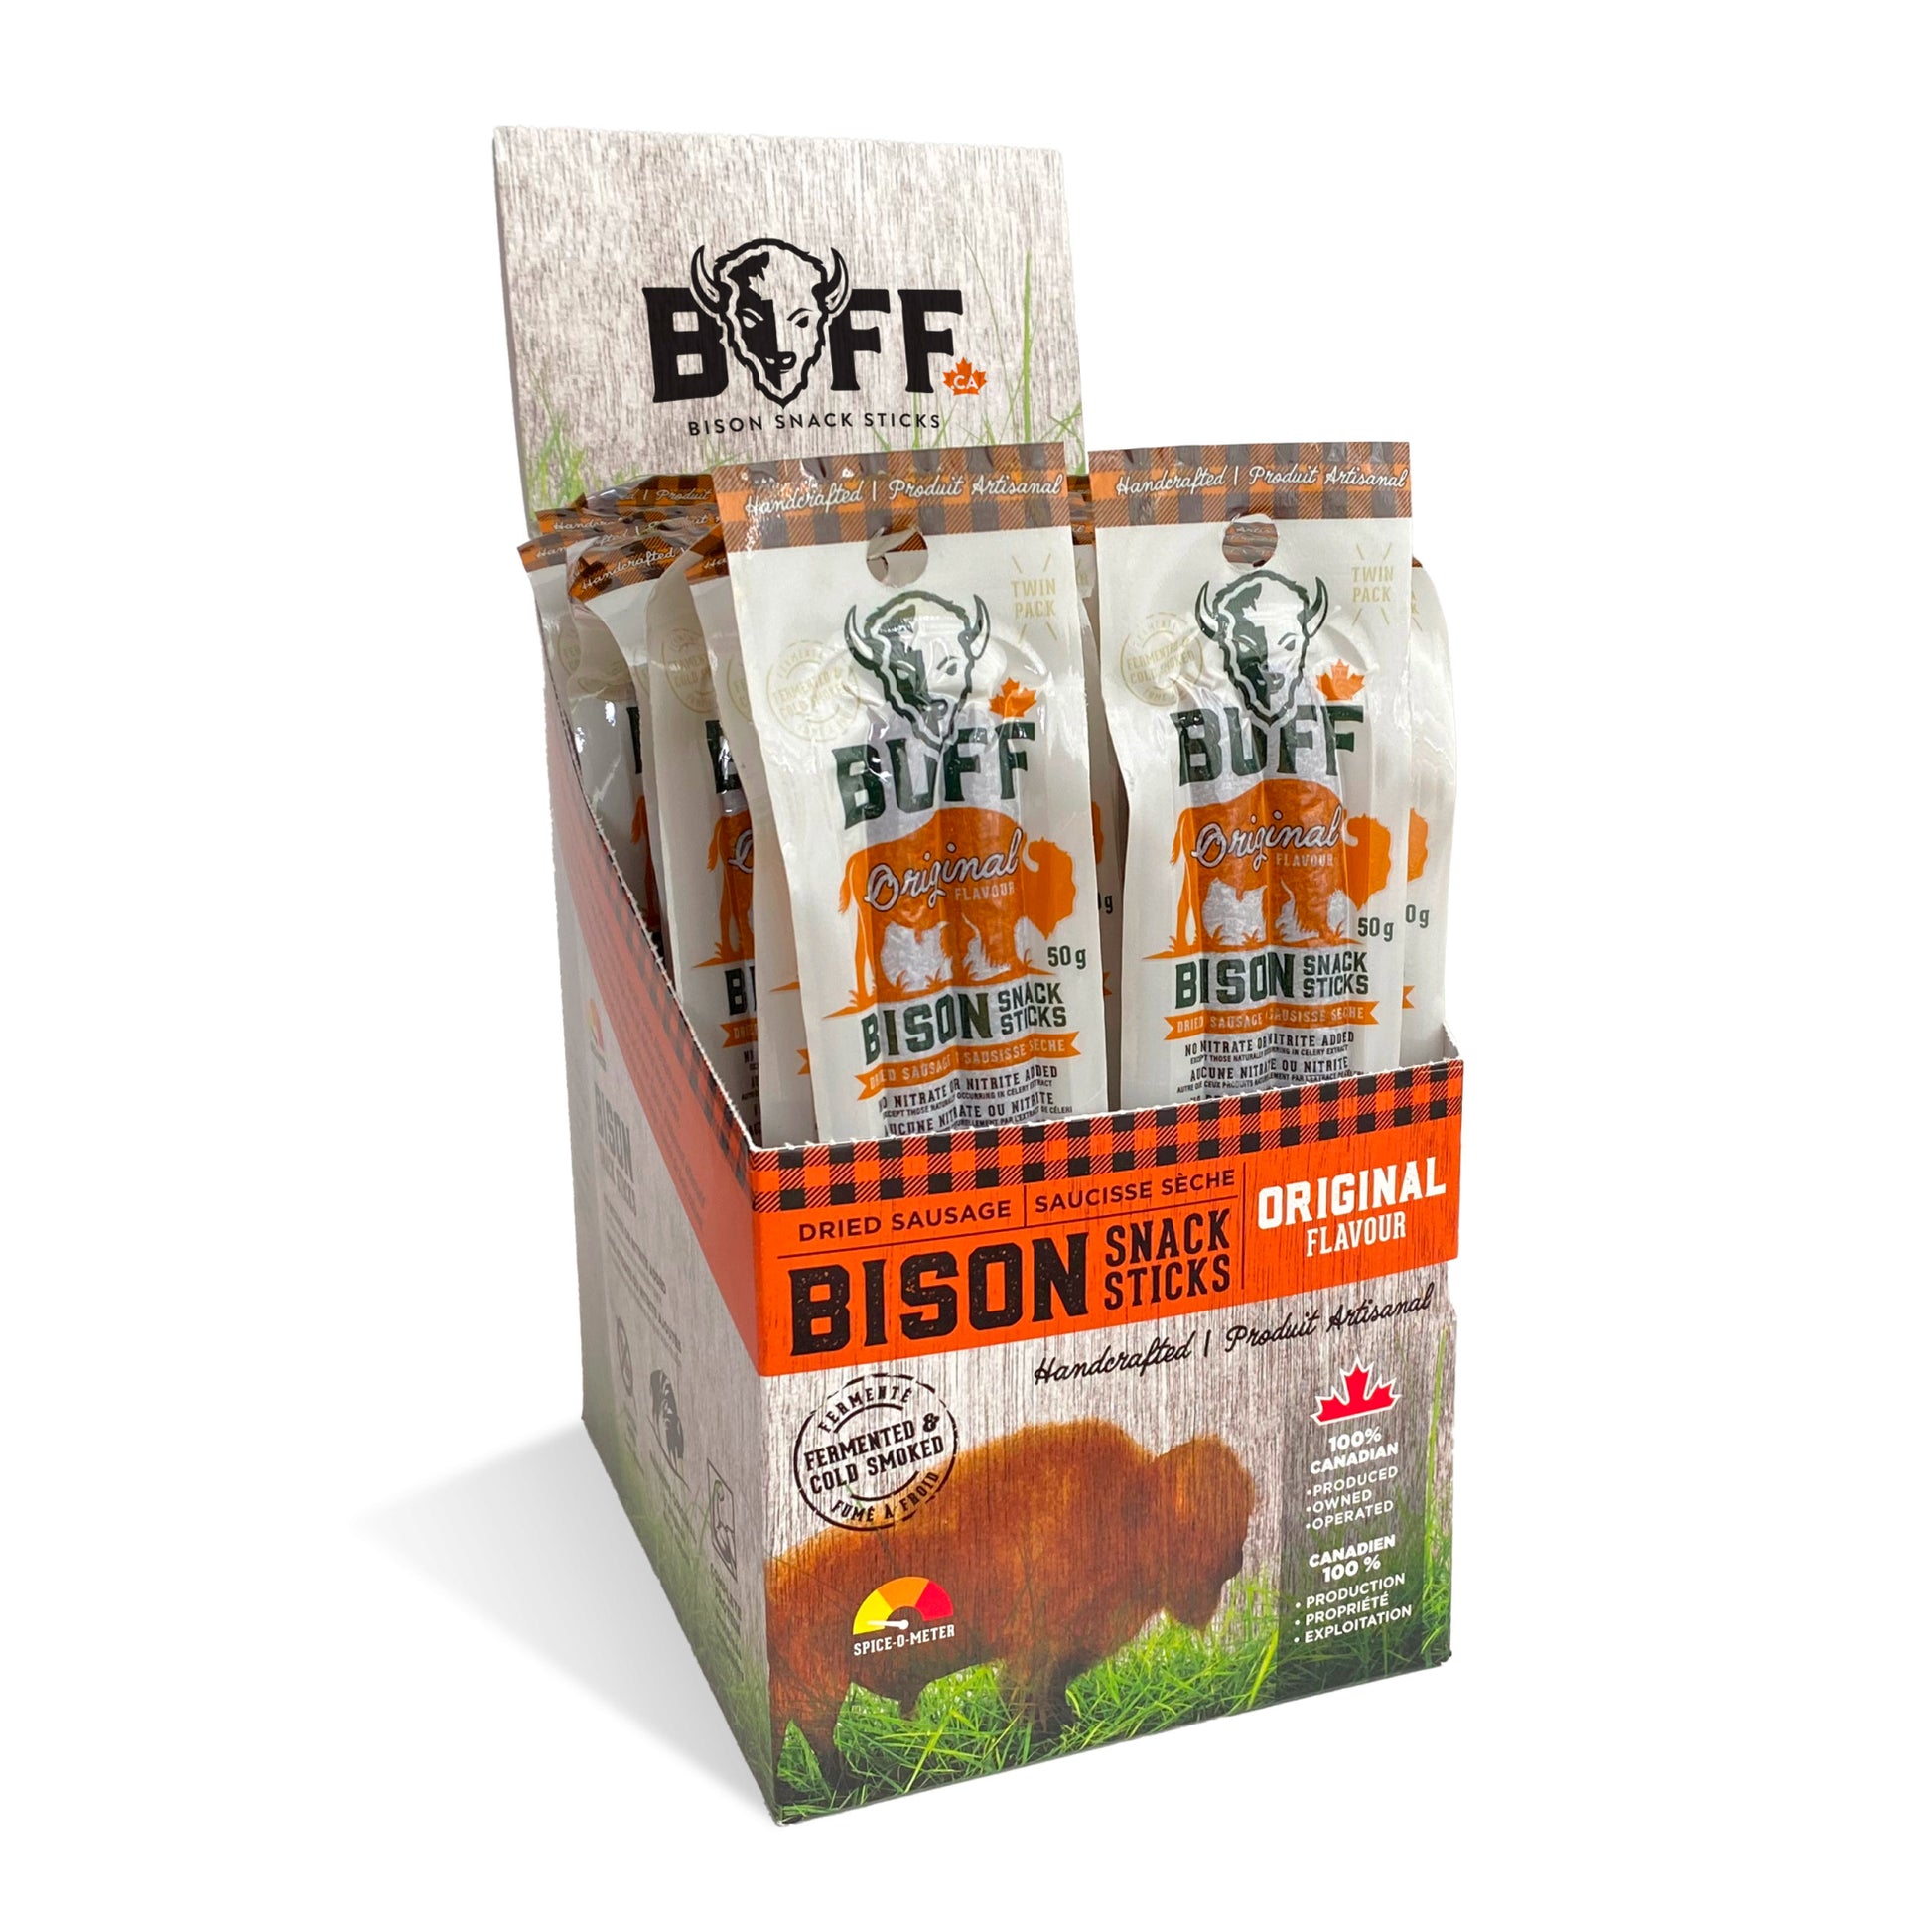 Original Flavor Twin Packs - $4.49 per pack when you buy a box! - Healthy Bison Meat Snack Sticks - BUFF